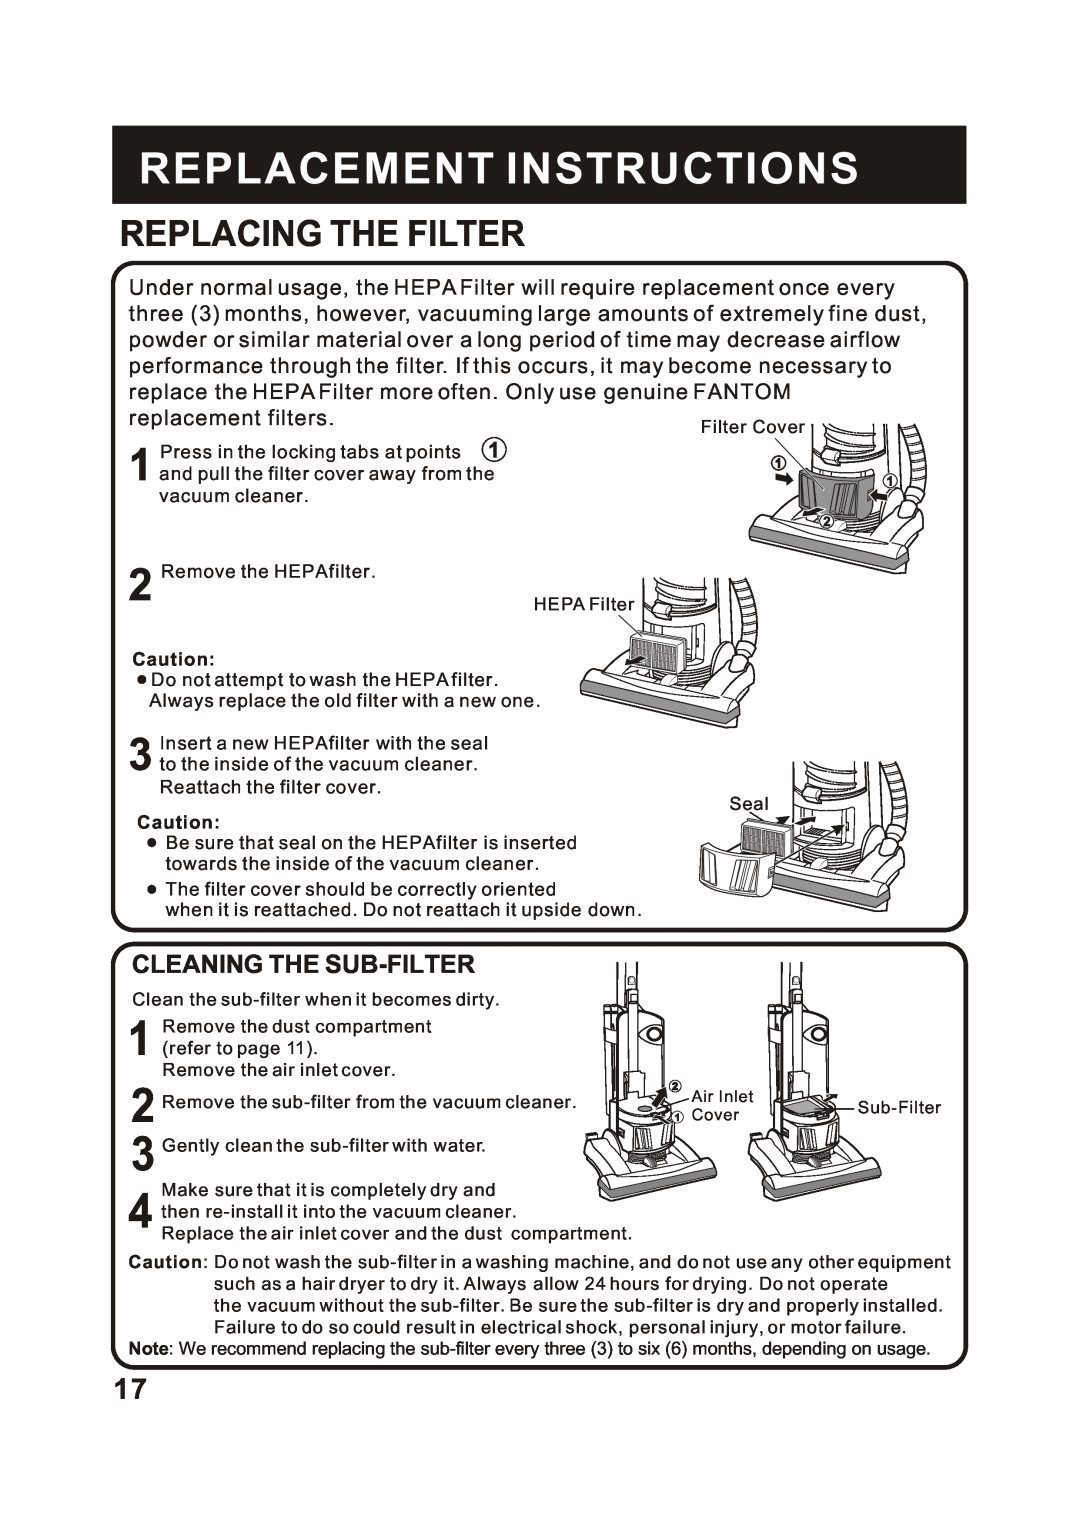 Fantom Vacuum FM744H instruction manual Replacing The Filter, Cleaning The Sub-Filter, Replacement Instructions 